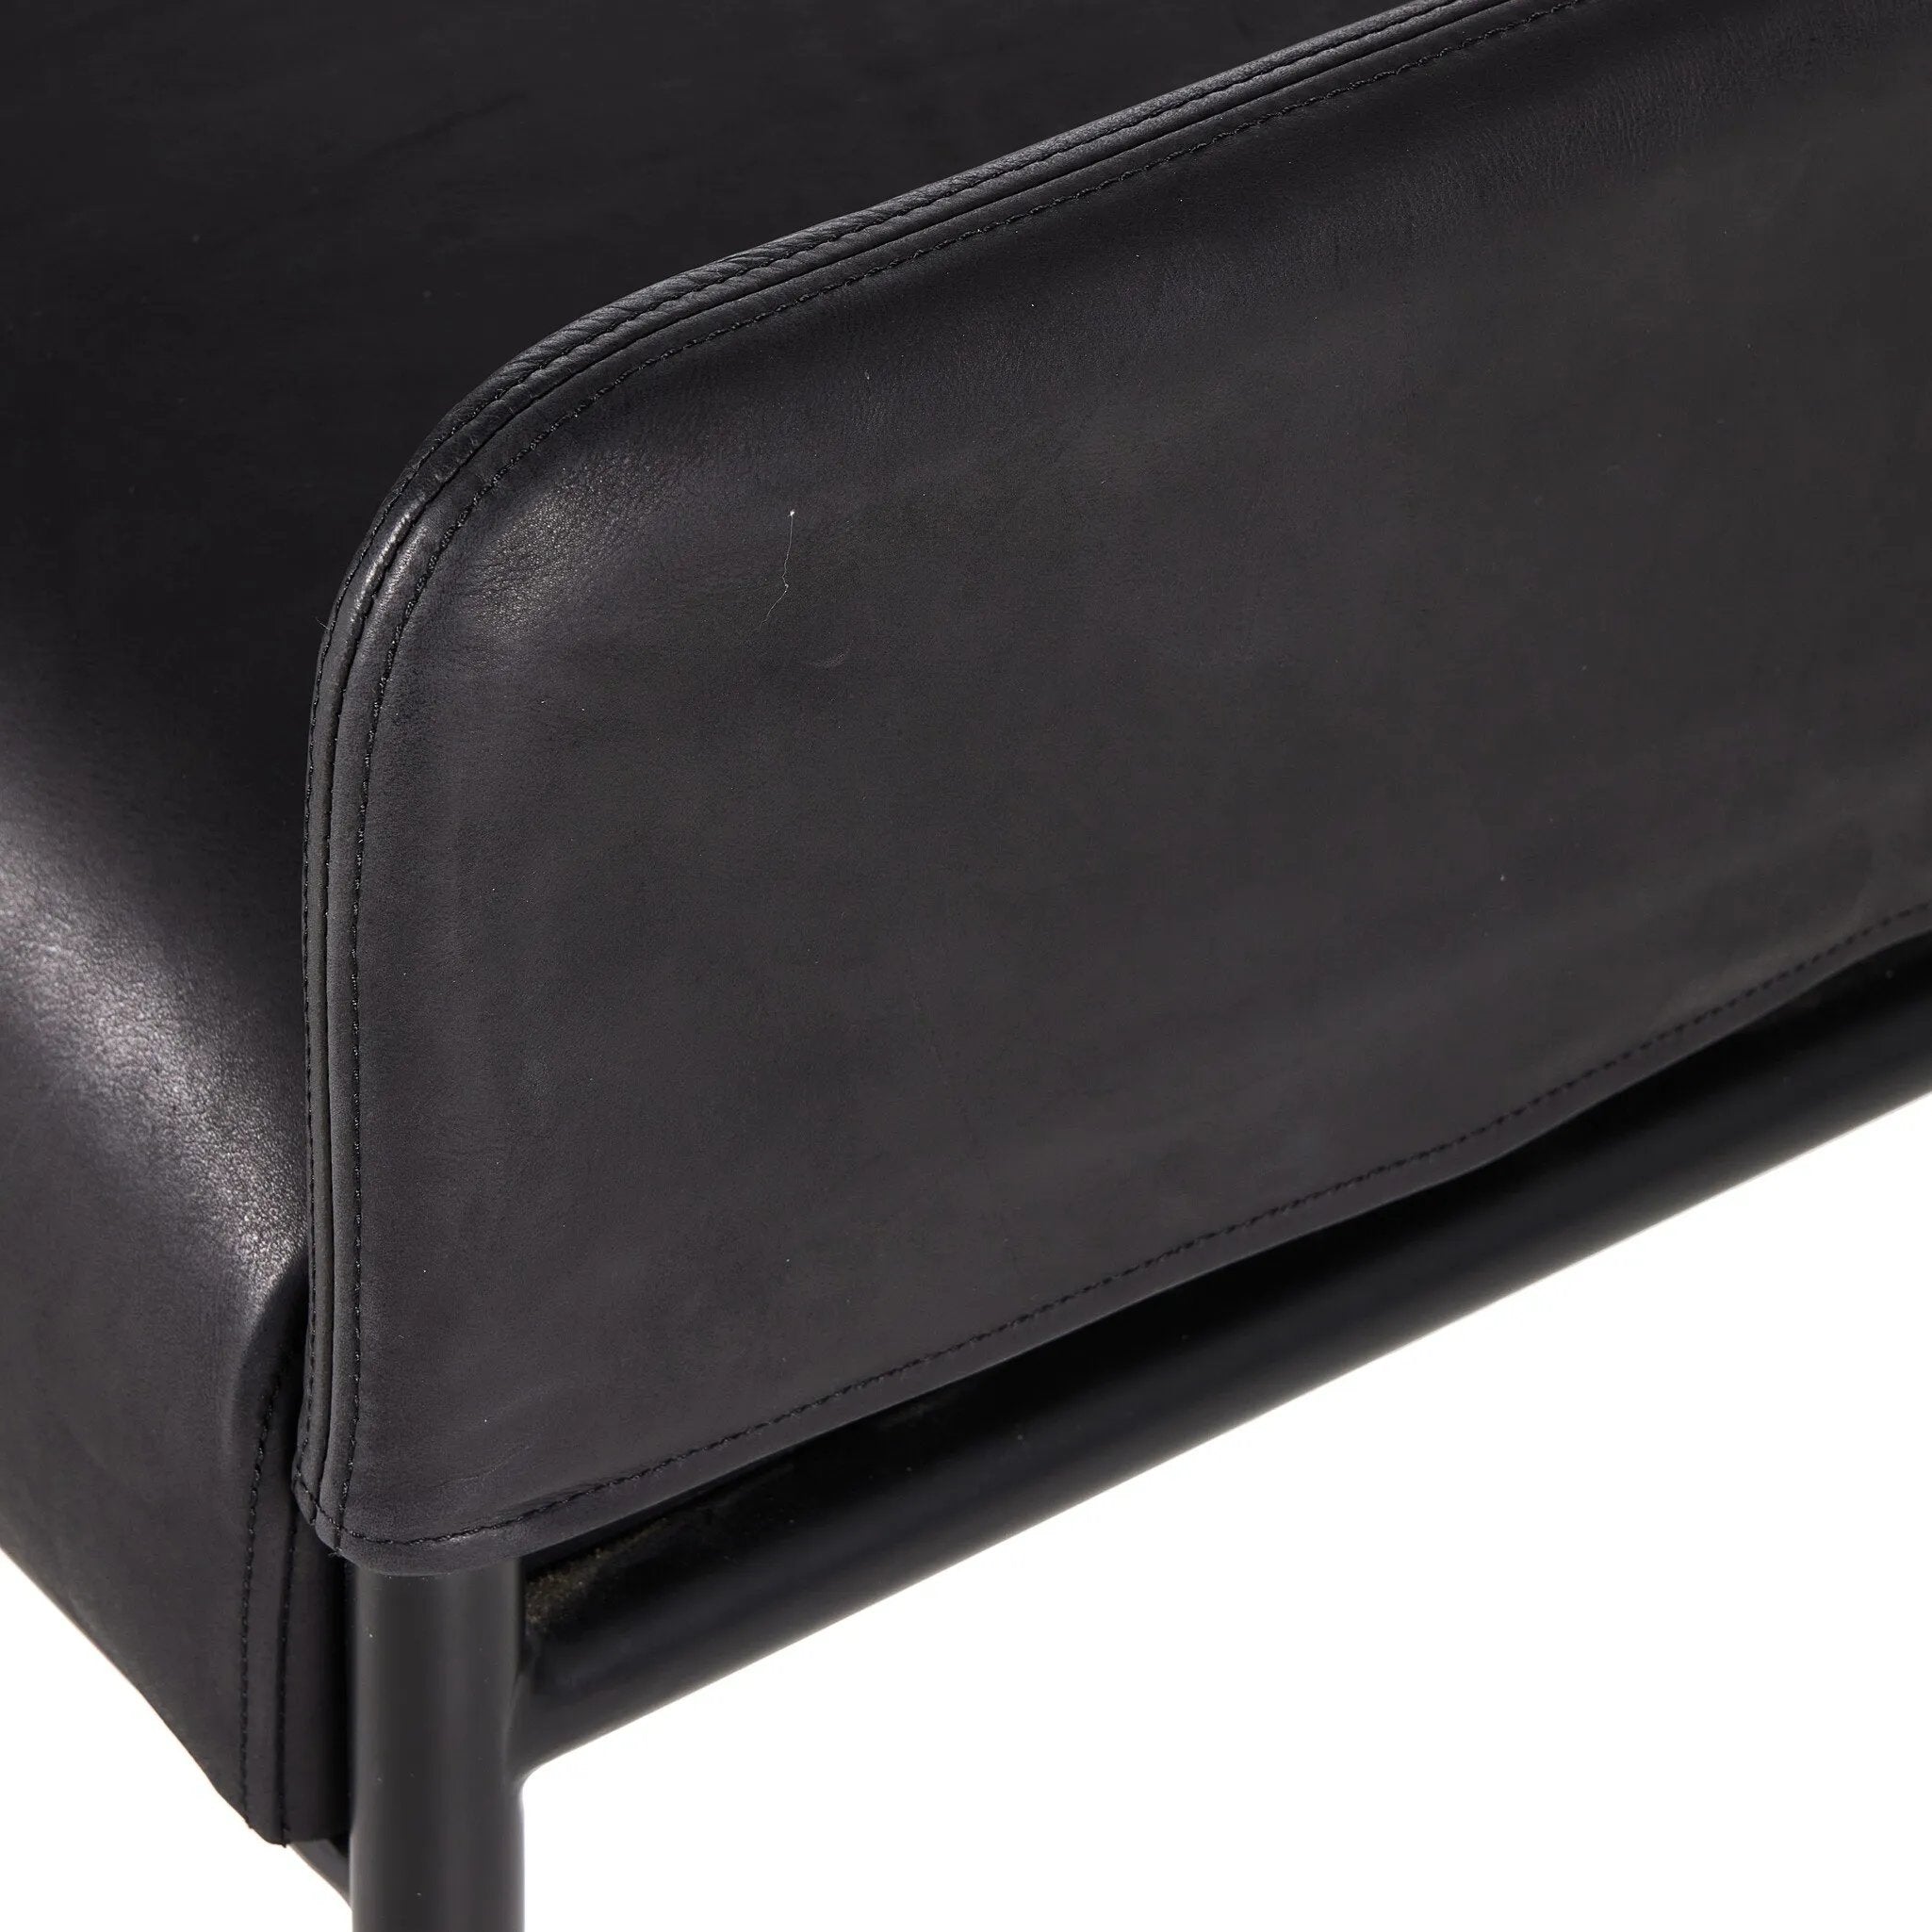 Black top-grain leather steals the show in this sleek, simple bench. Sourced from one of the oldest family-owned tanneries in Italy's Bassano del Grappa, heirloom leather is salvaged and processed from upcycled hides featuring an abundance of natural markings, scars and color variations. Amethyst Home provides interior design, new home construction design consulting, vintage area rugs, and lighting in the Laguna Beach metro area.